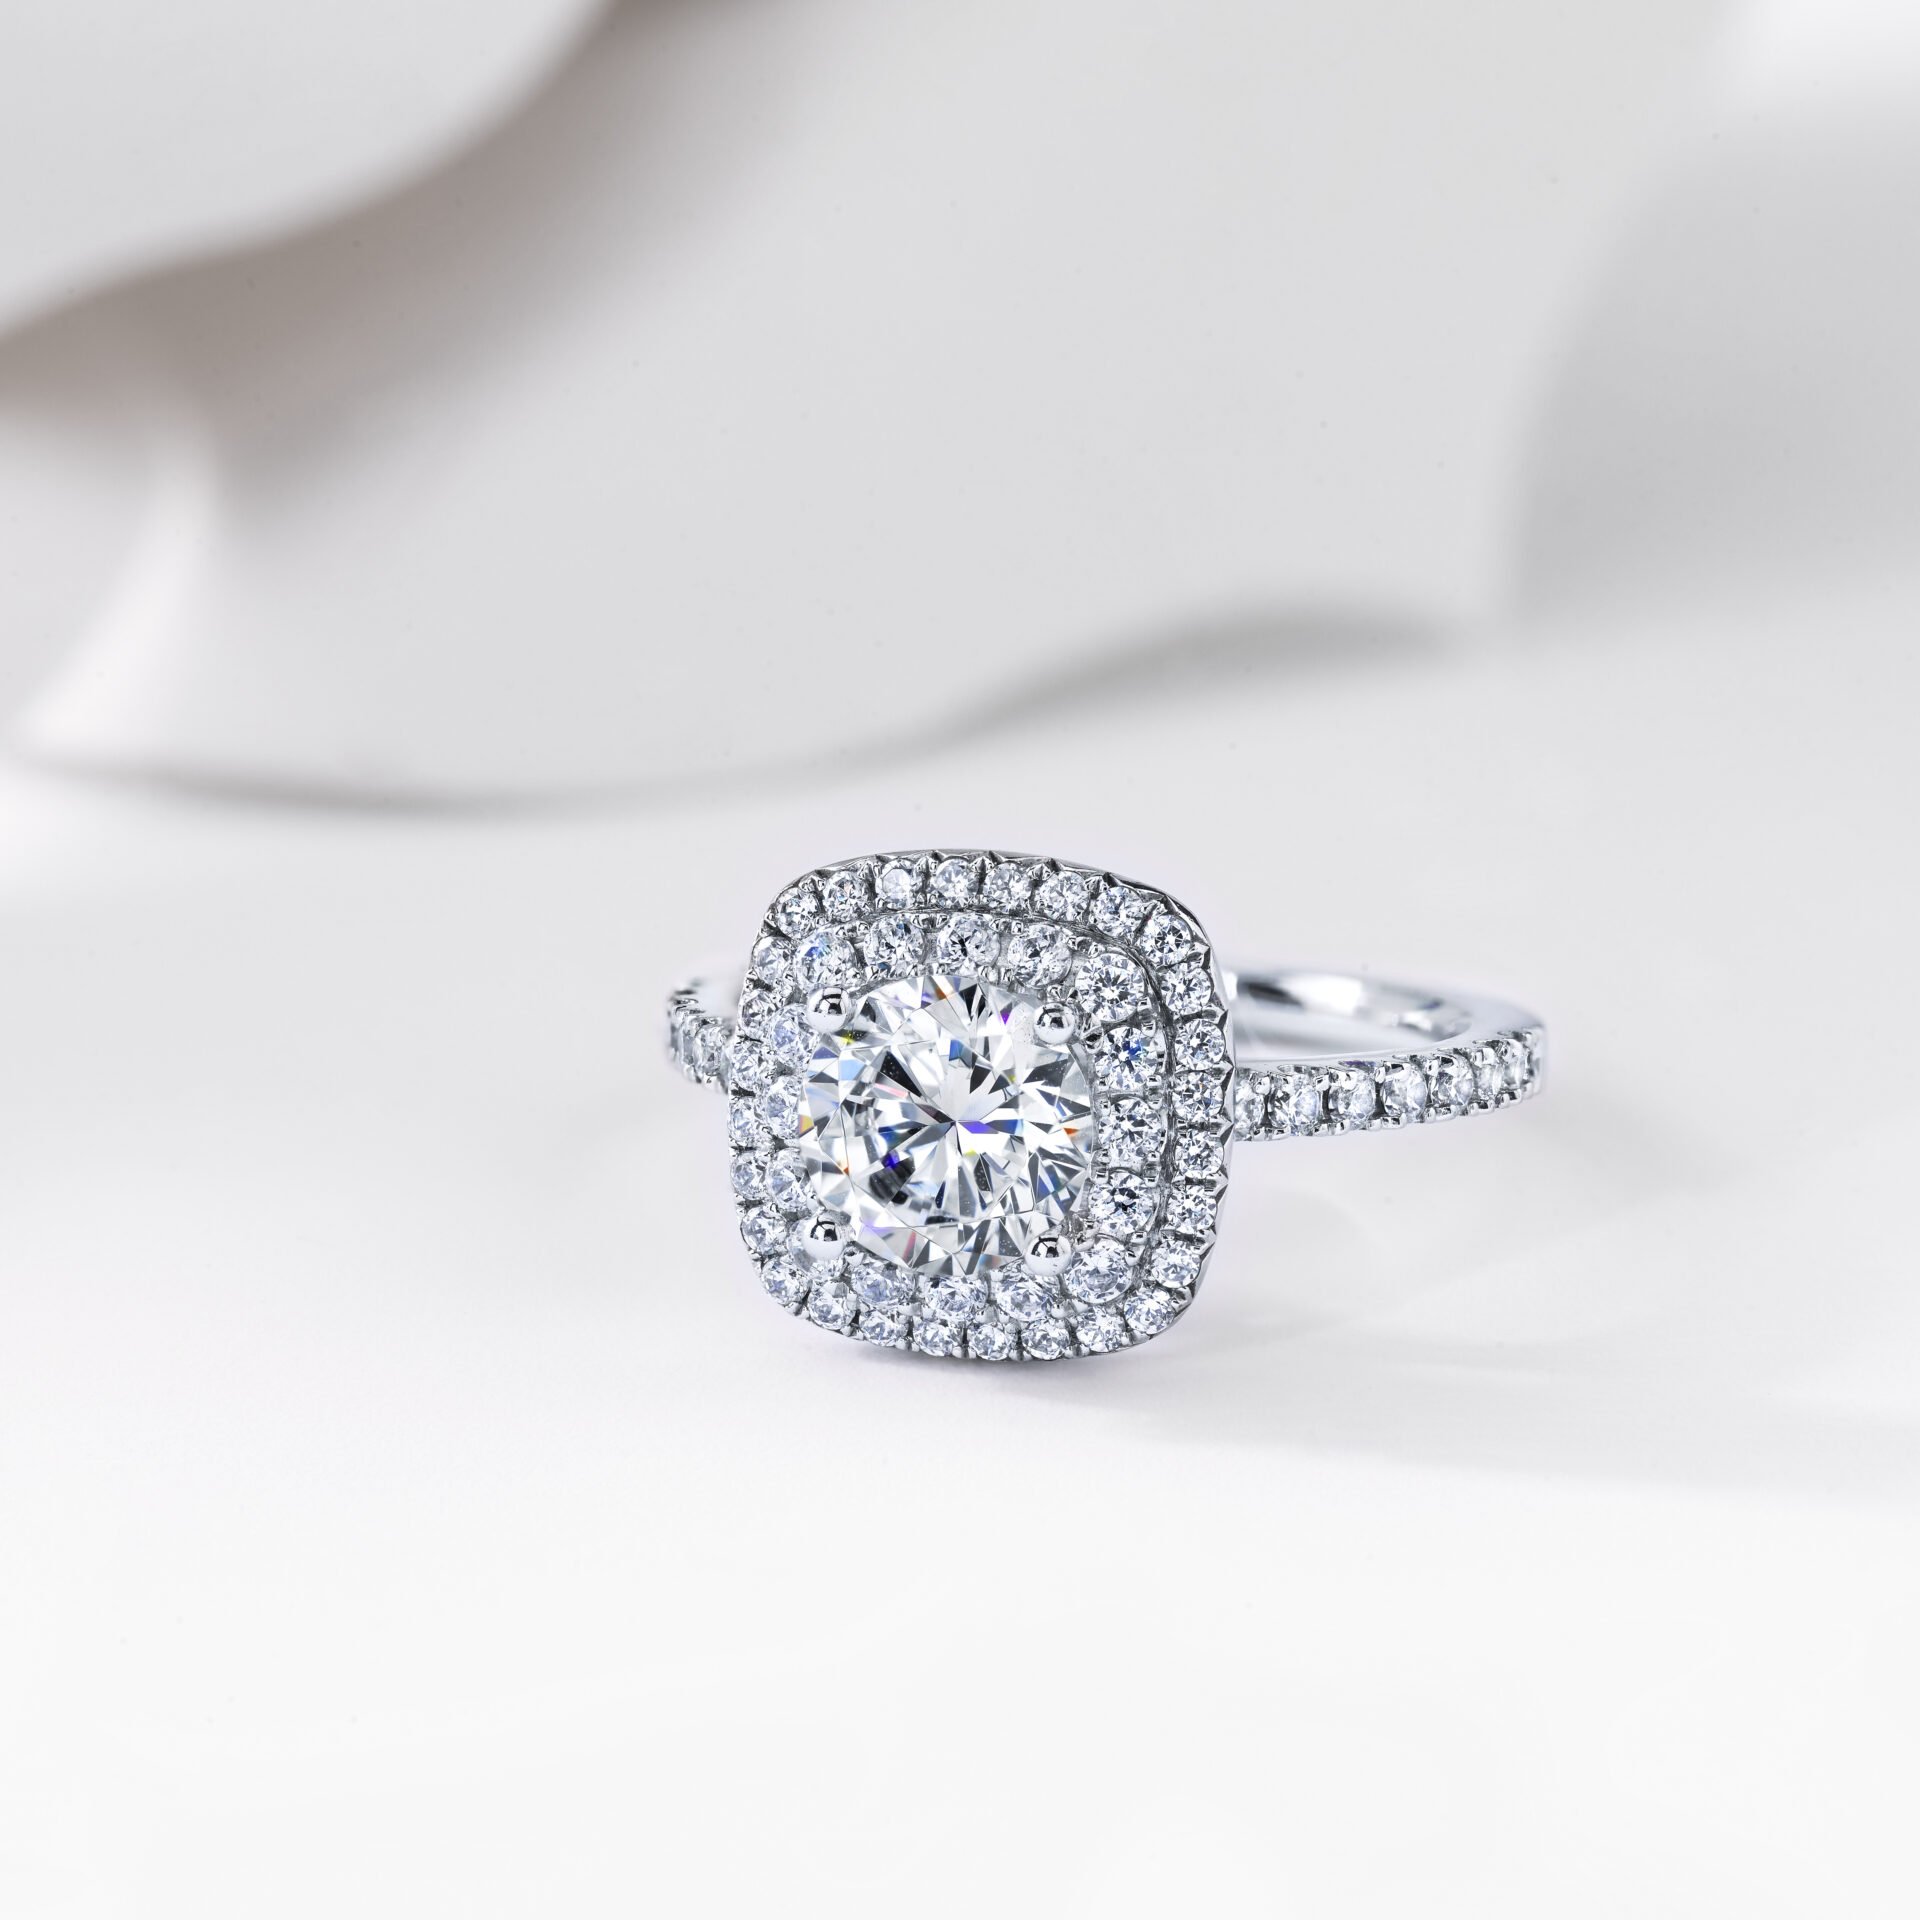 Small diamond fell off engagement ring | Weddings, Etiquette and Advice |  Wedding Forums | WeddingWire